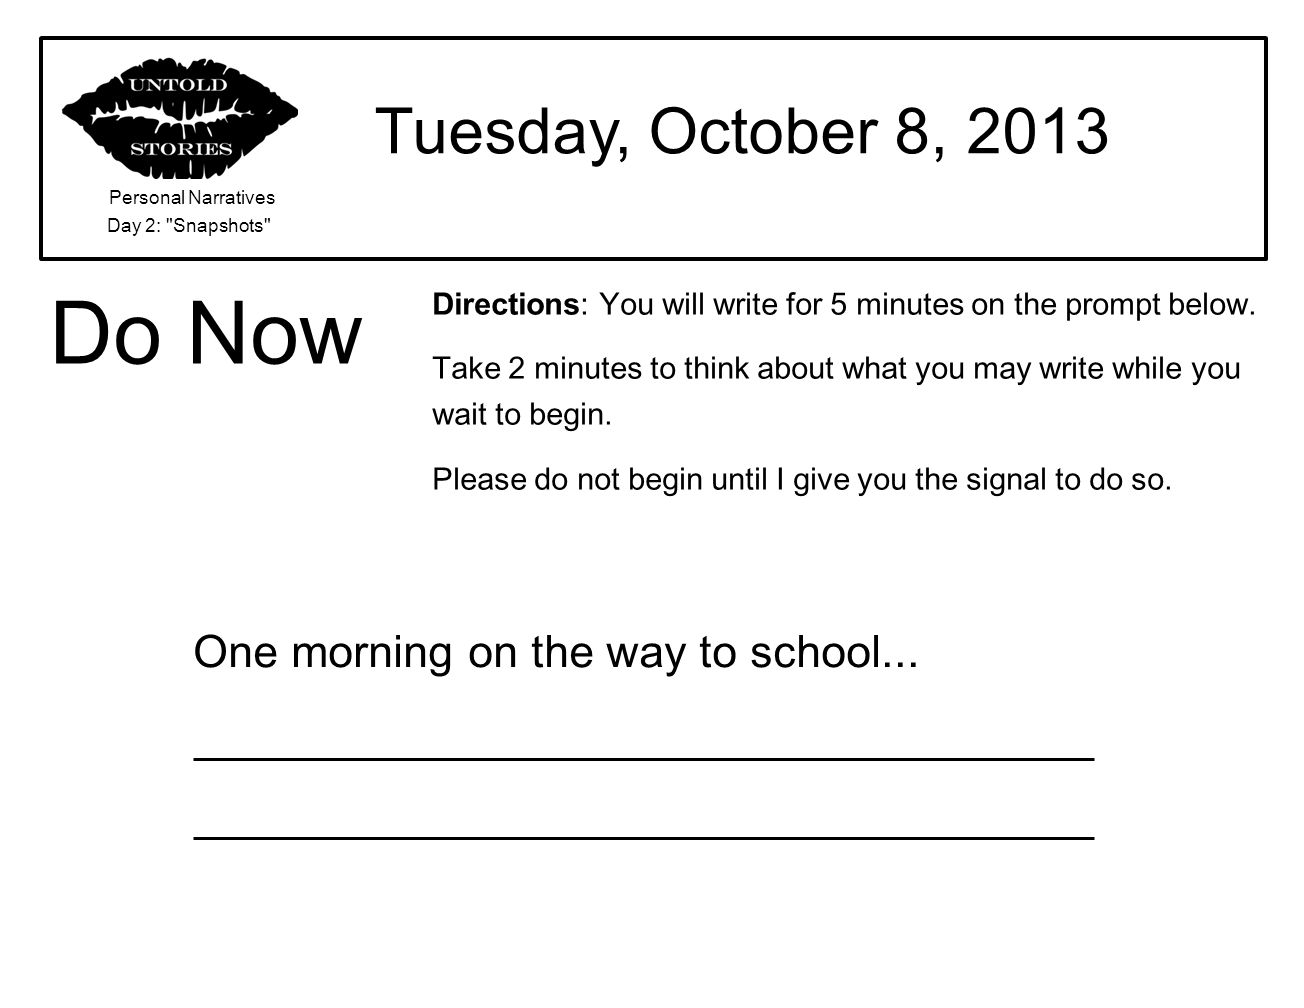 Do Now Tuesday, October 8, 2013 One morning on the way to school...